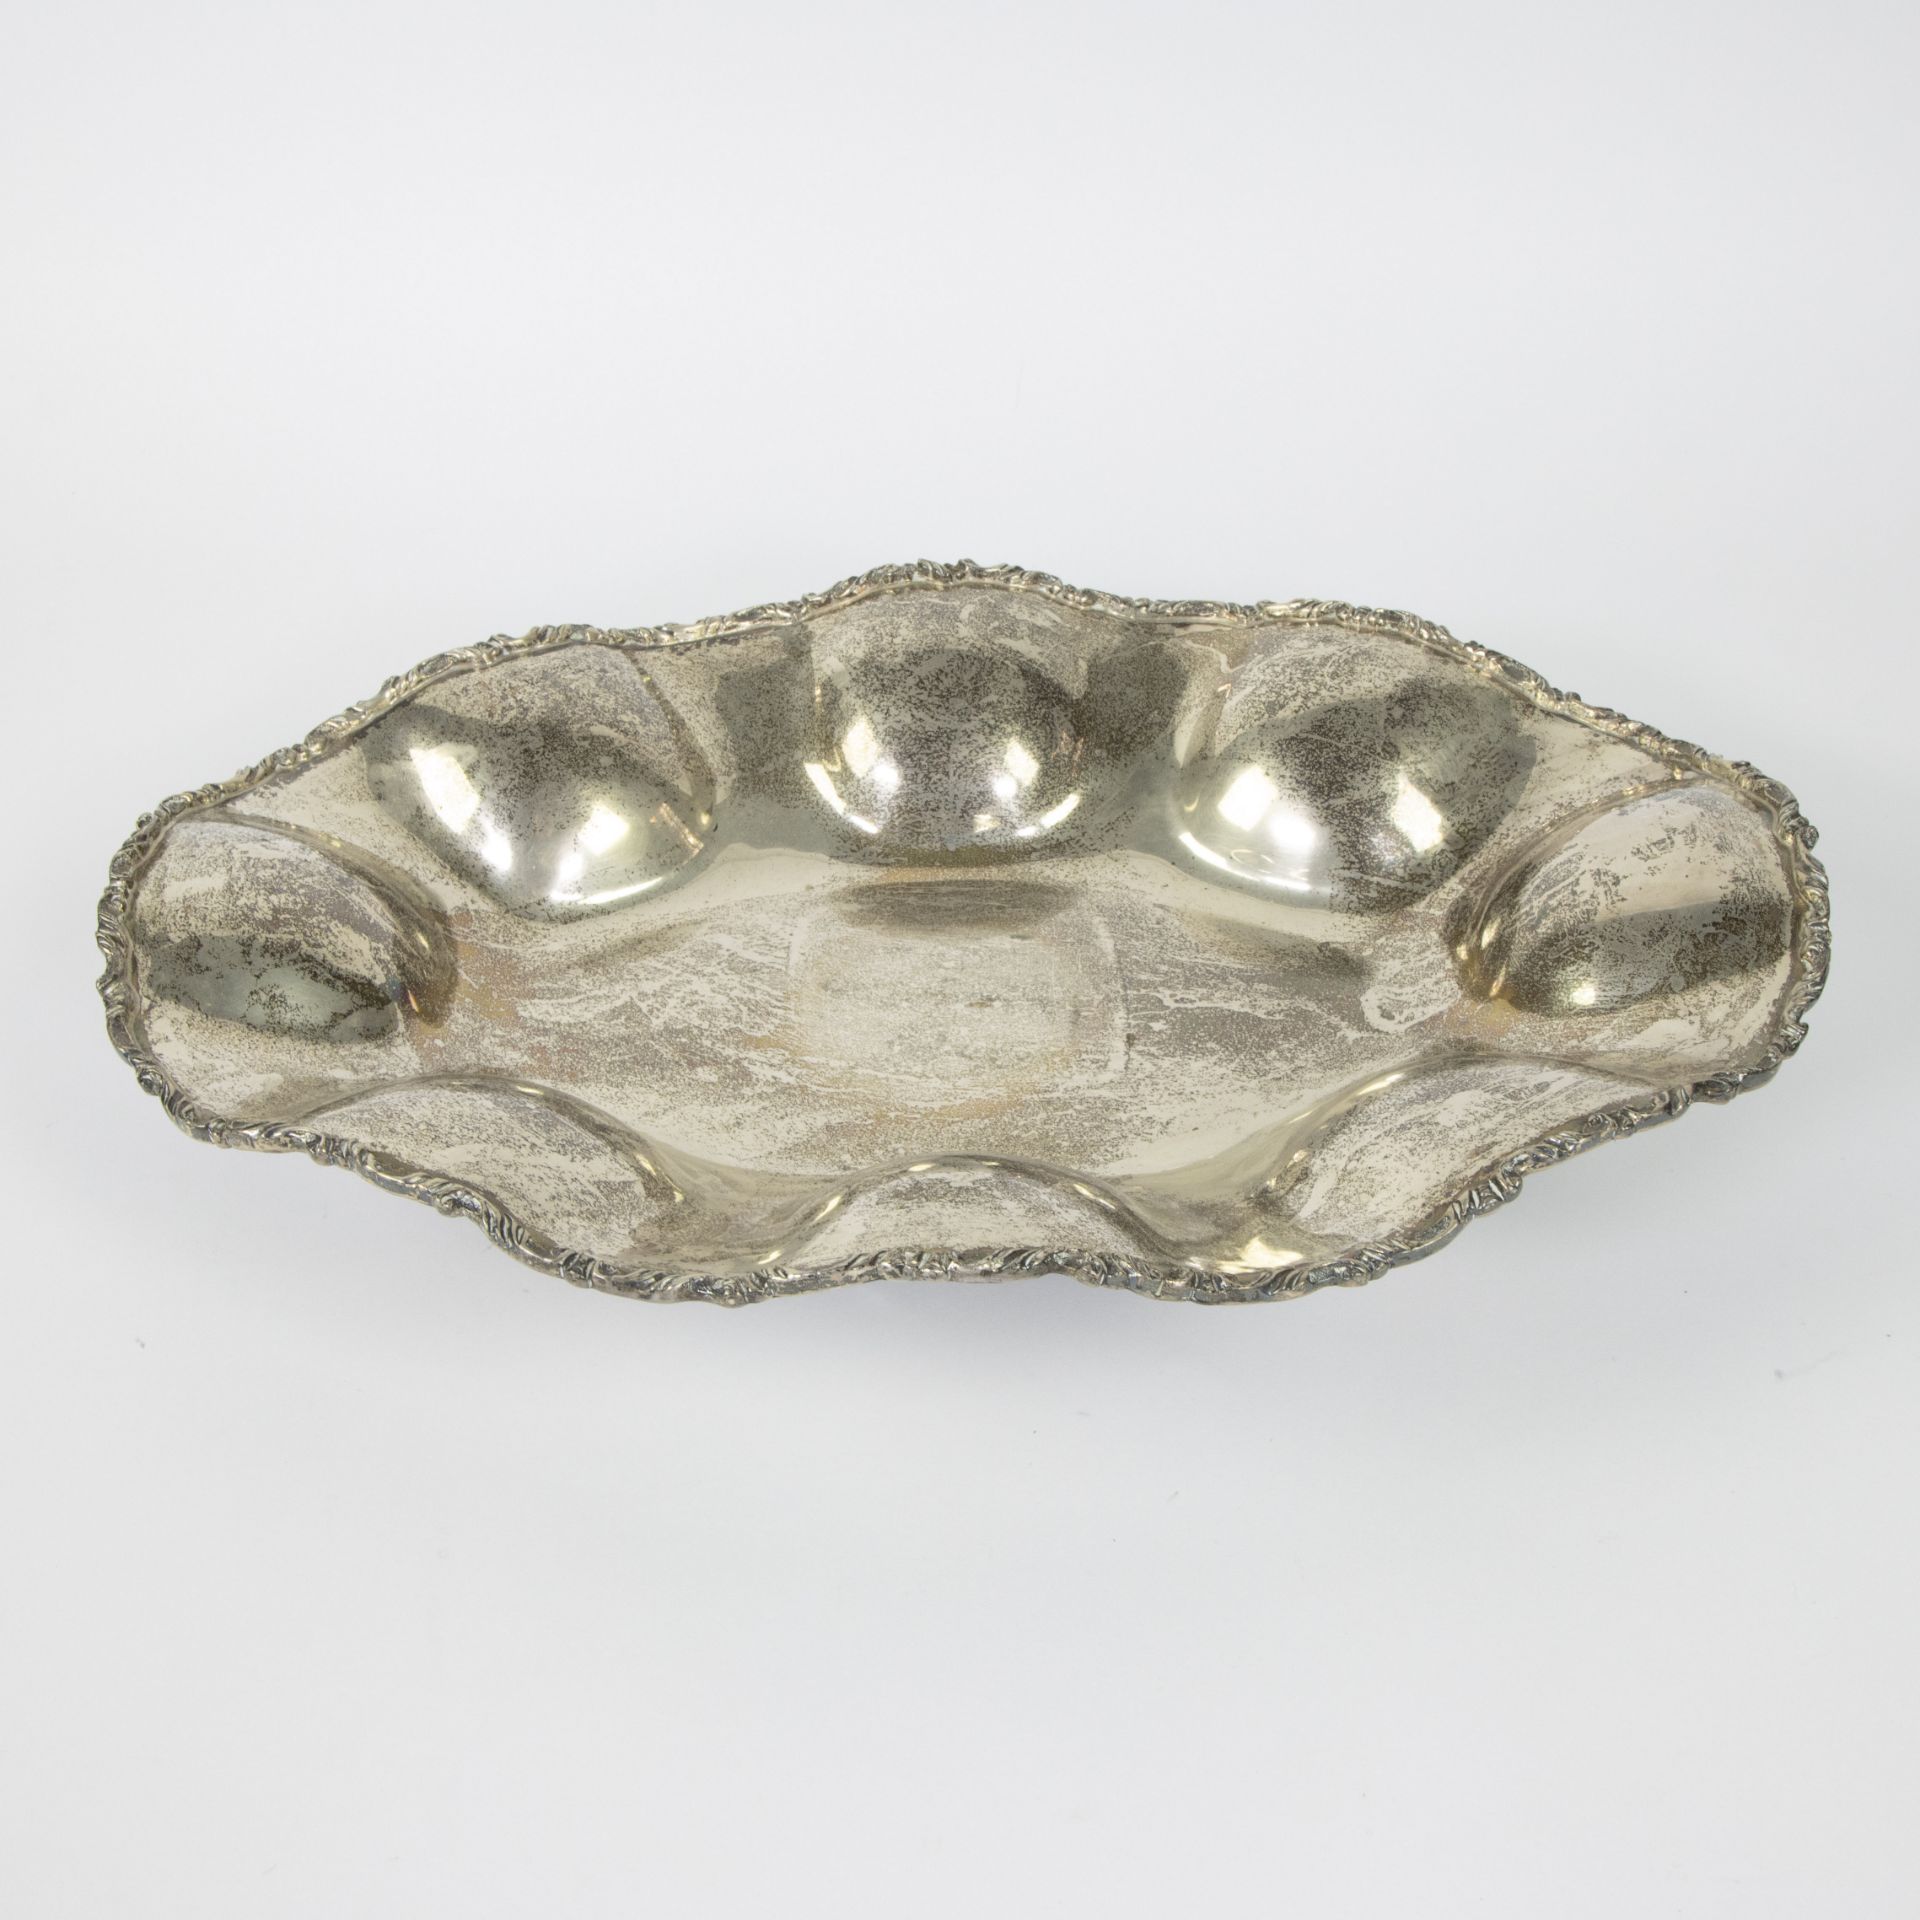 Silver bowl, Mexican content 925, 975 gram